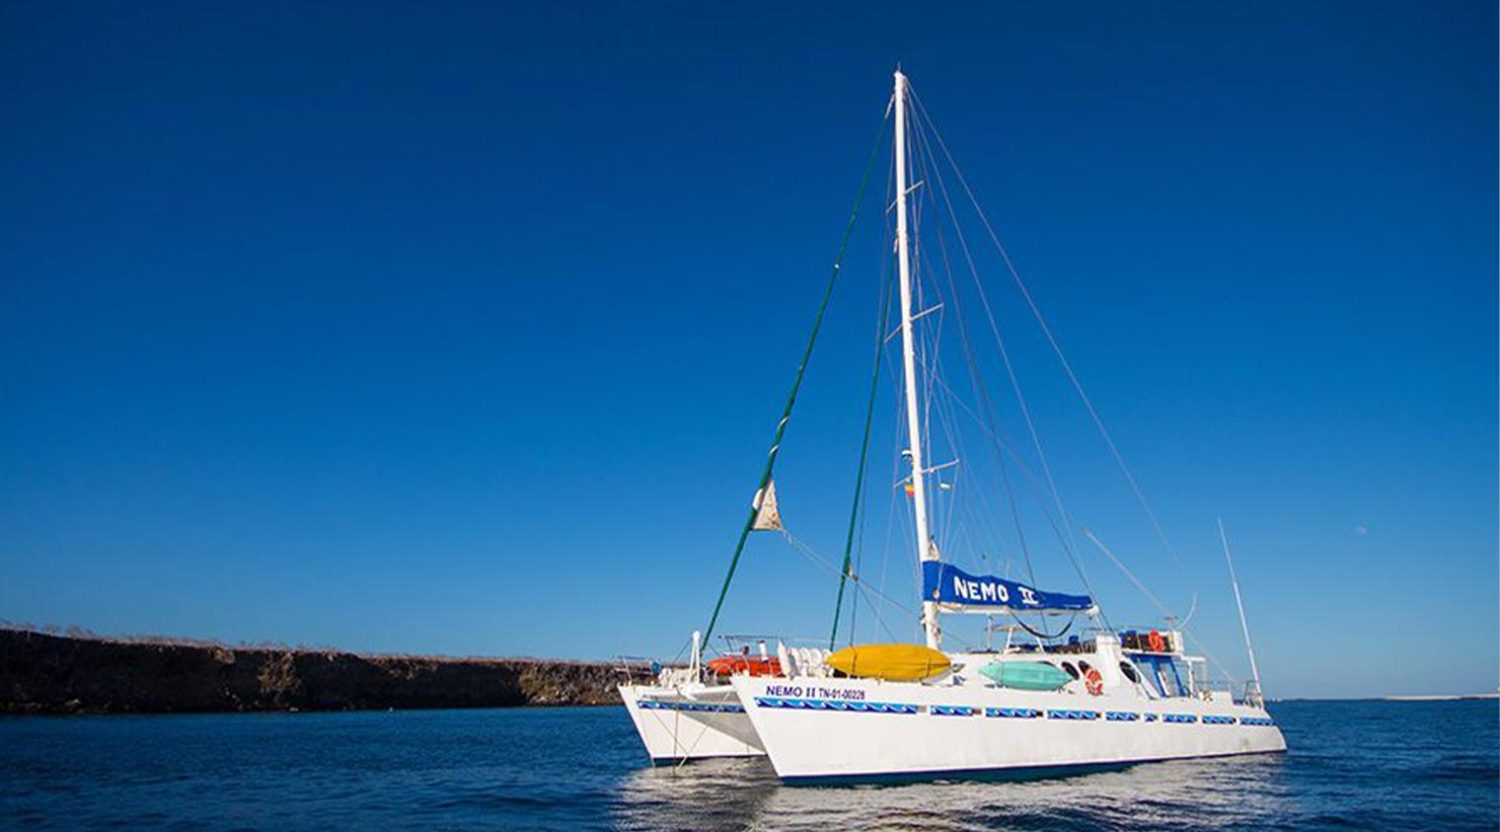 picture nemo 2 yacht of galapagos islands